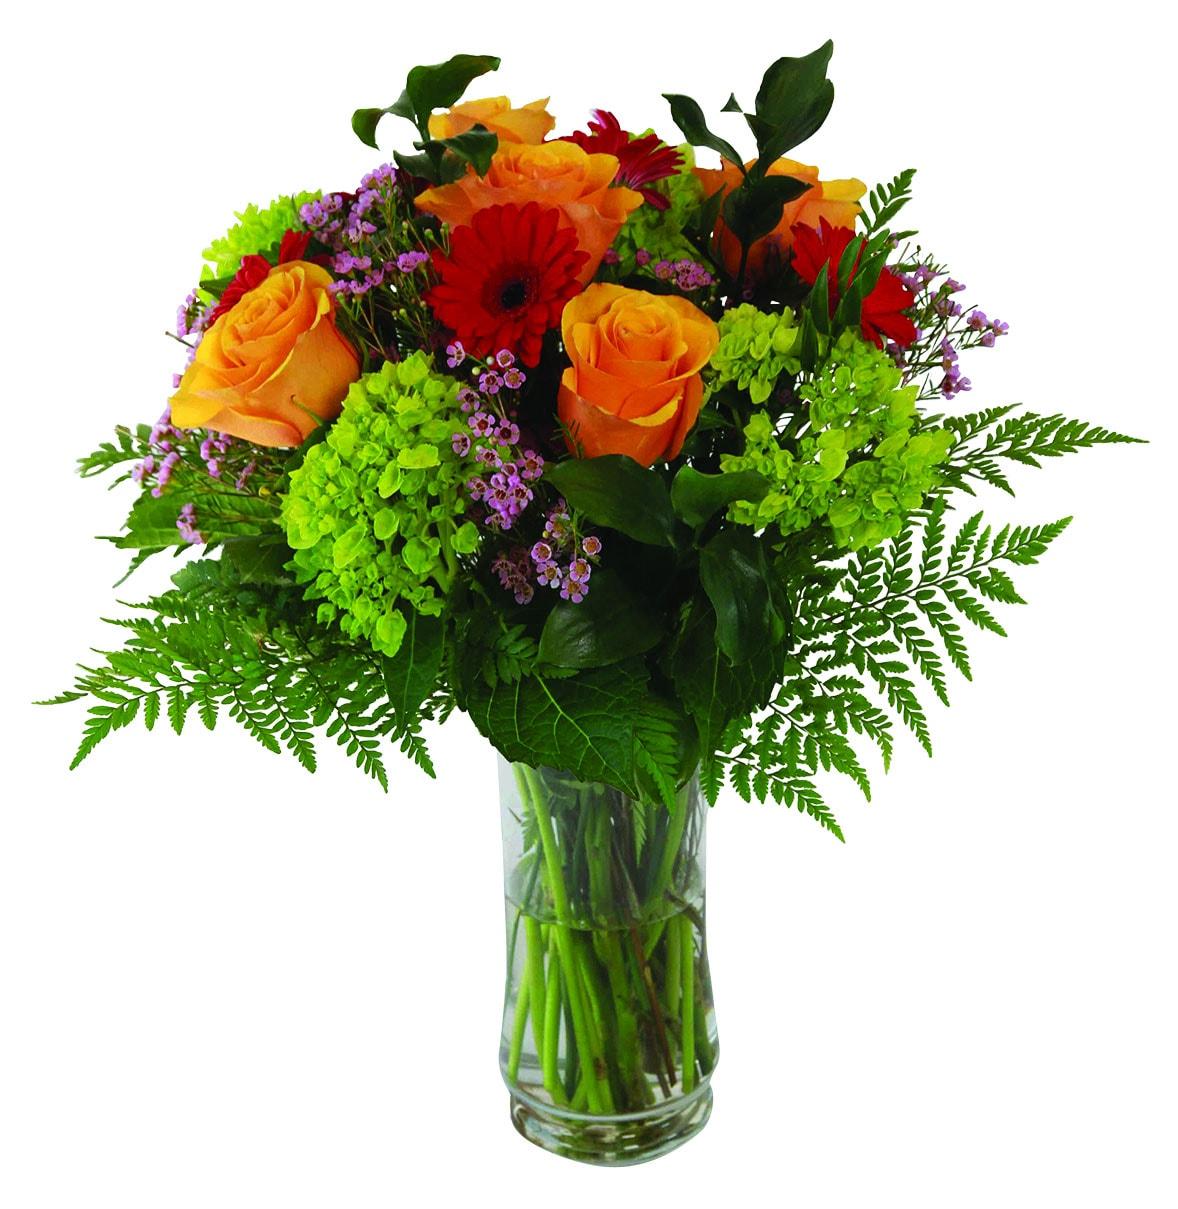 A vase arrangement with orange roses, white hydrangea, red mini gerberas, greens and fillers.